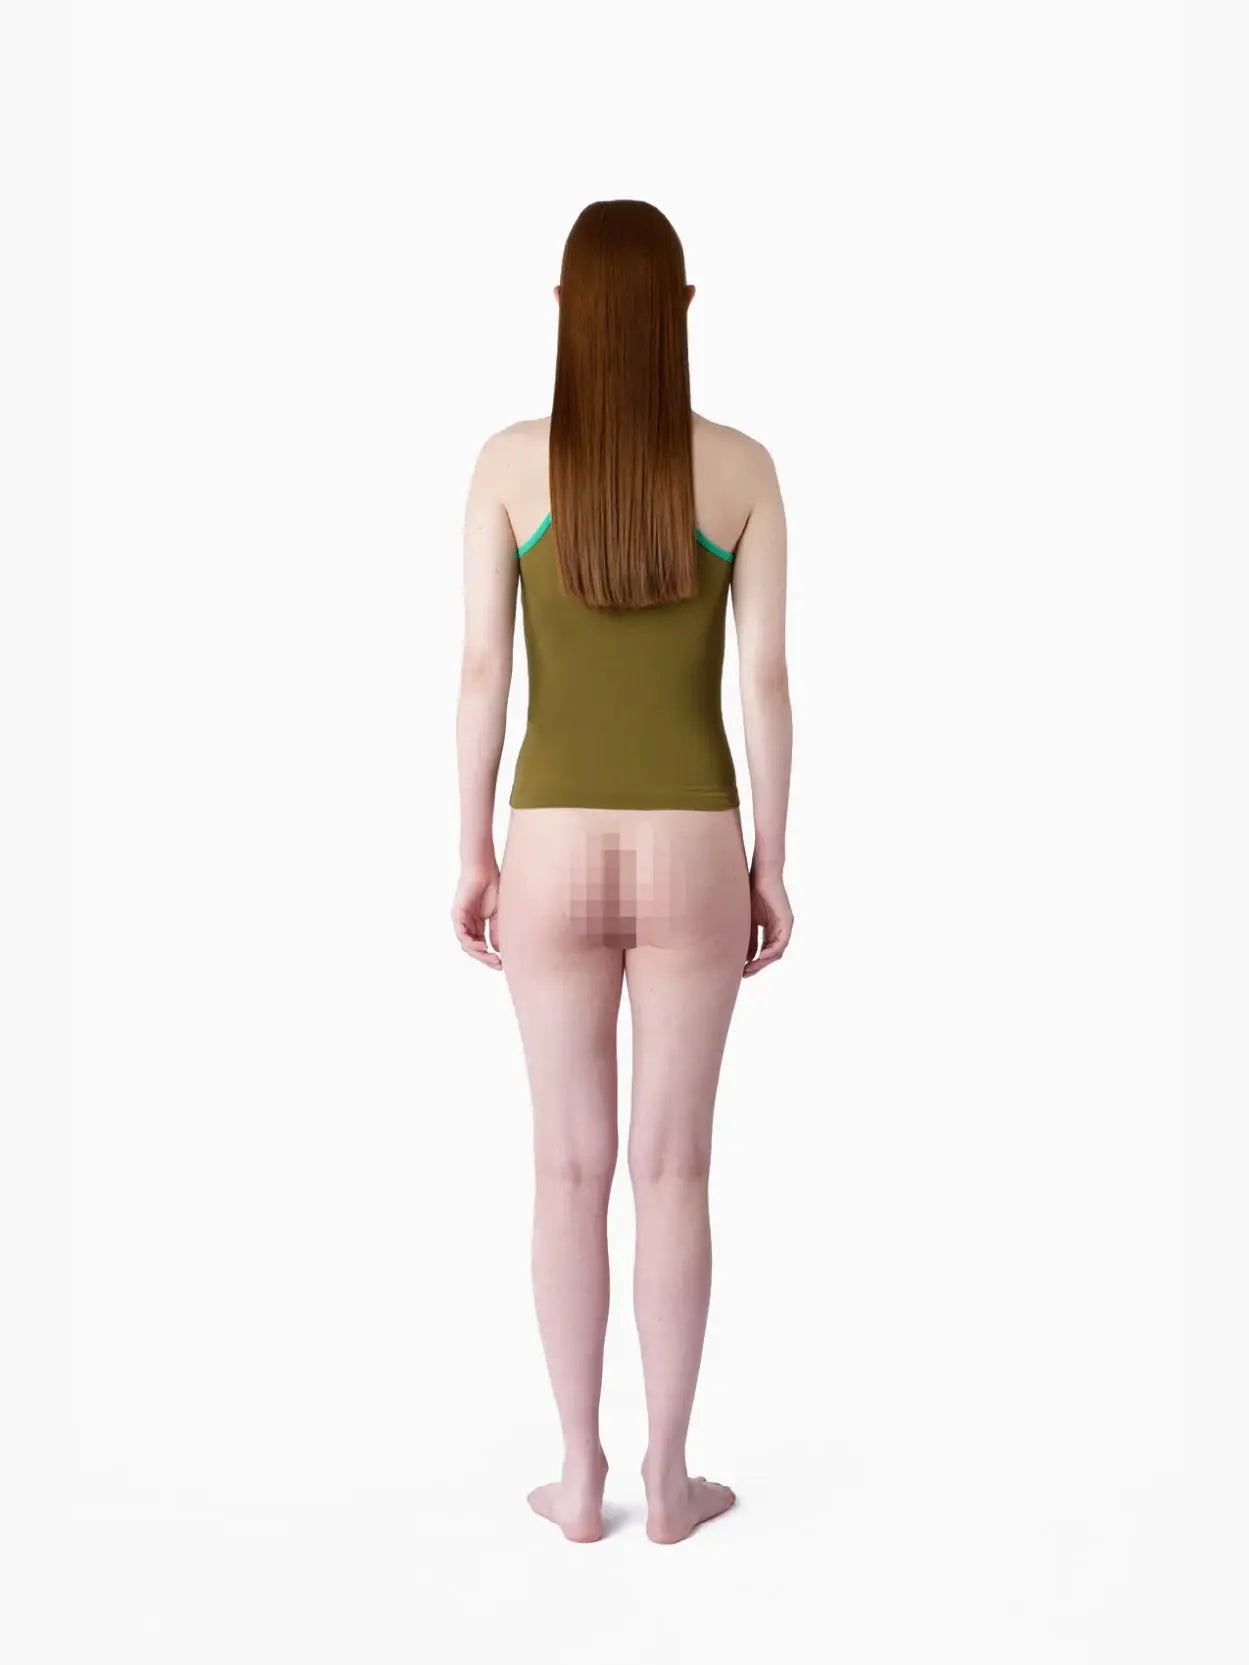 A sleeveless, brown tank top with green trim around the armholes and neckline. The tag at the collar reads "SUNNEI" in black text. The Stretchy Halter Top Olive Green is available at Bassalstore in Barcelona against a clean white background.